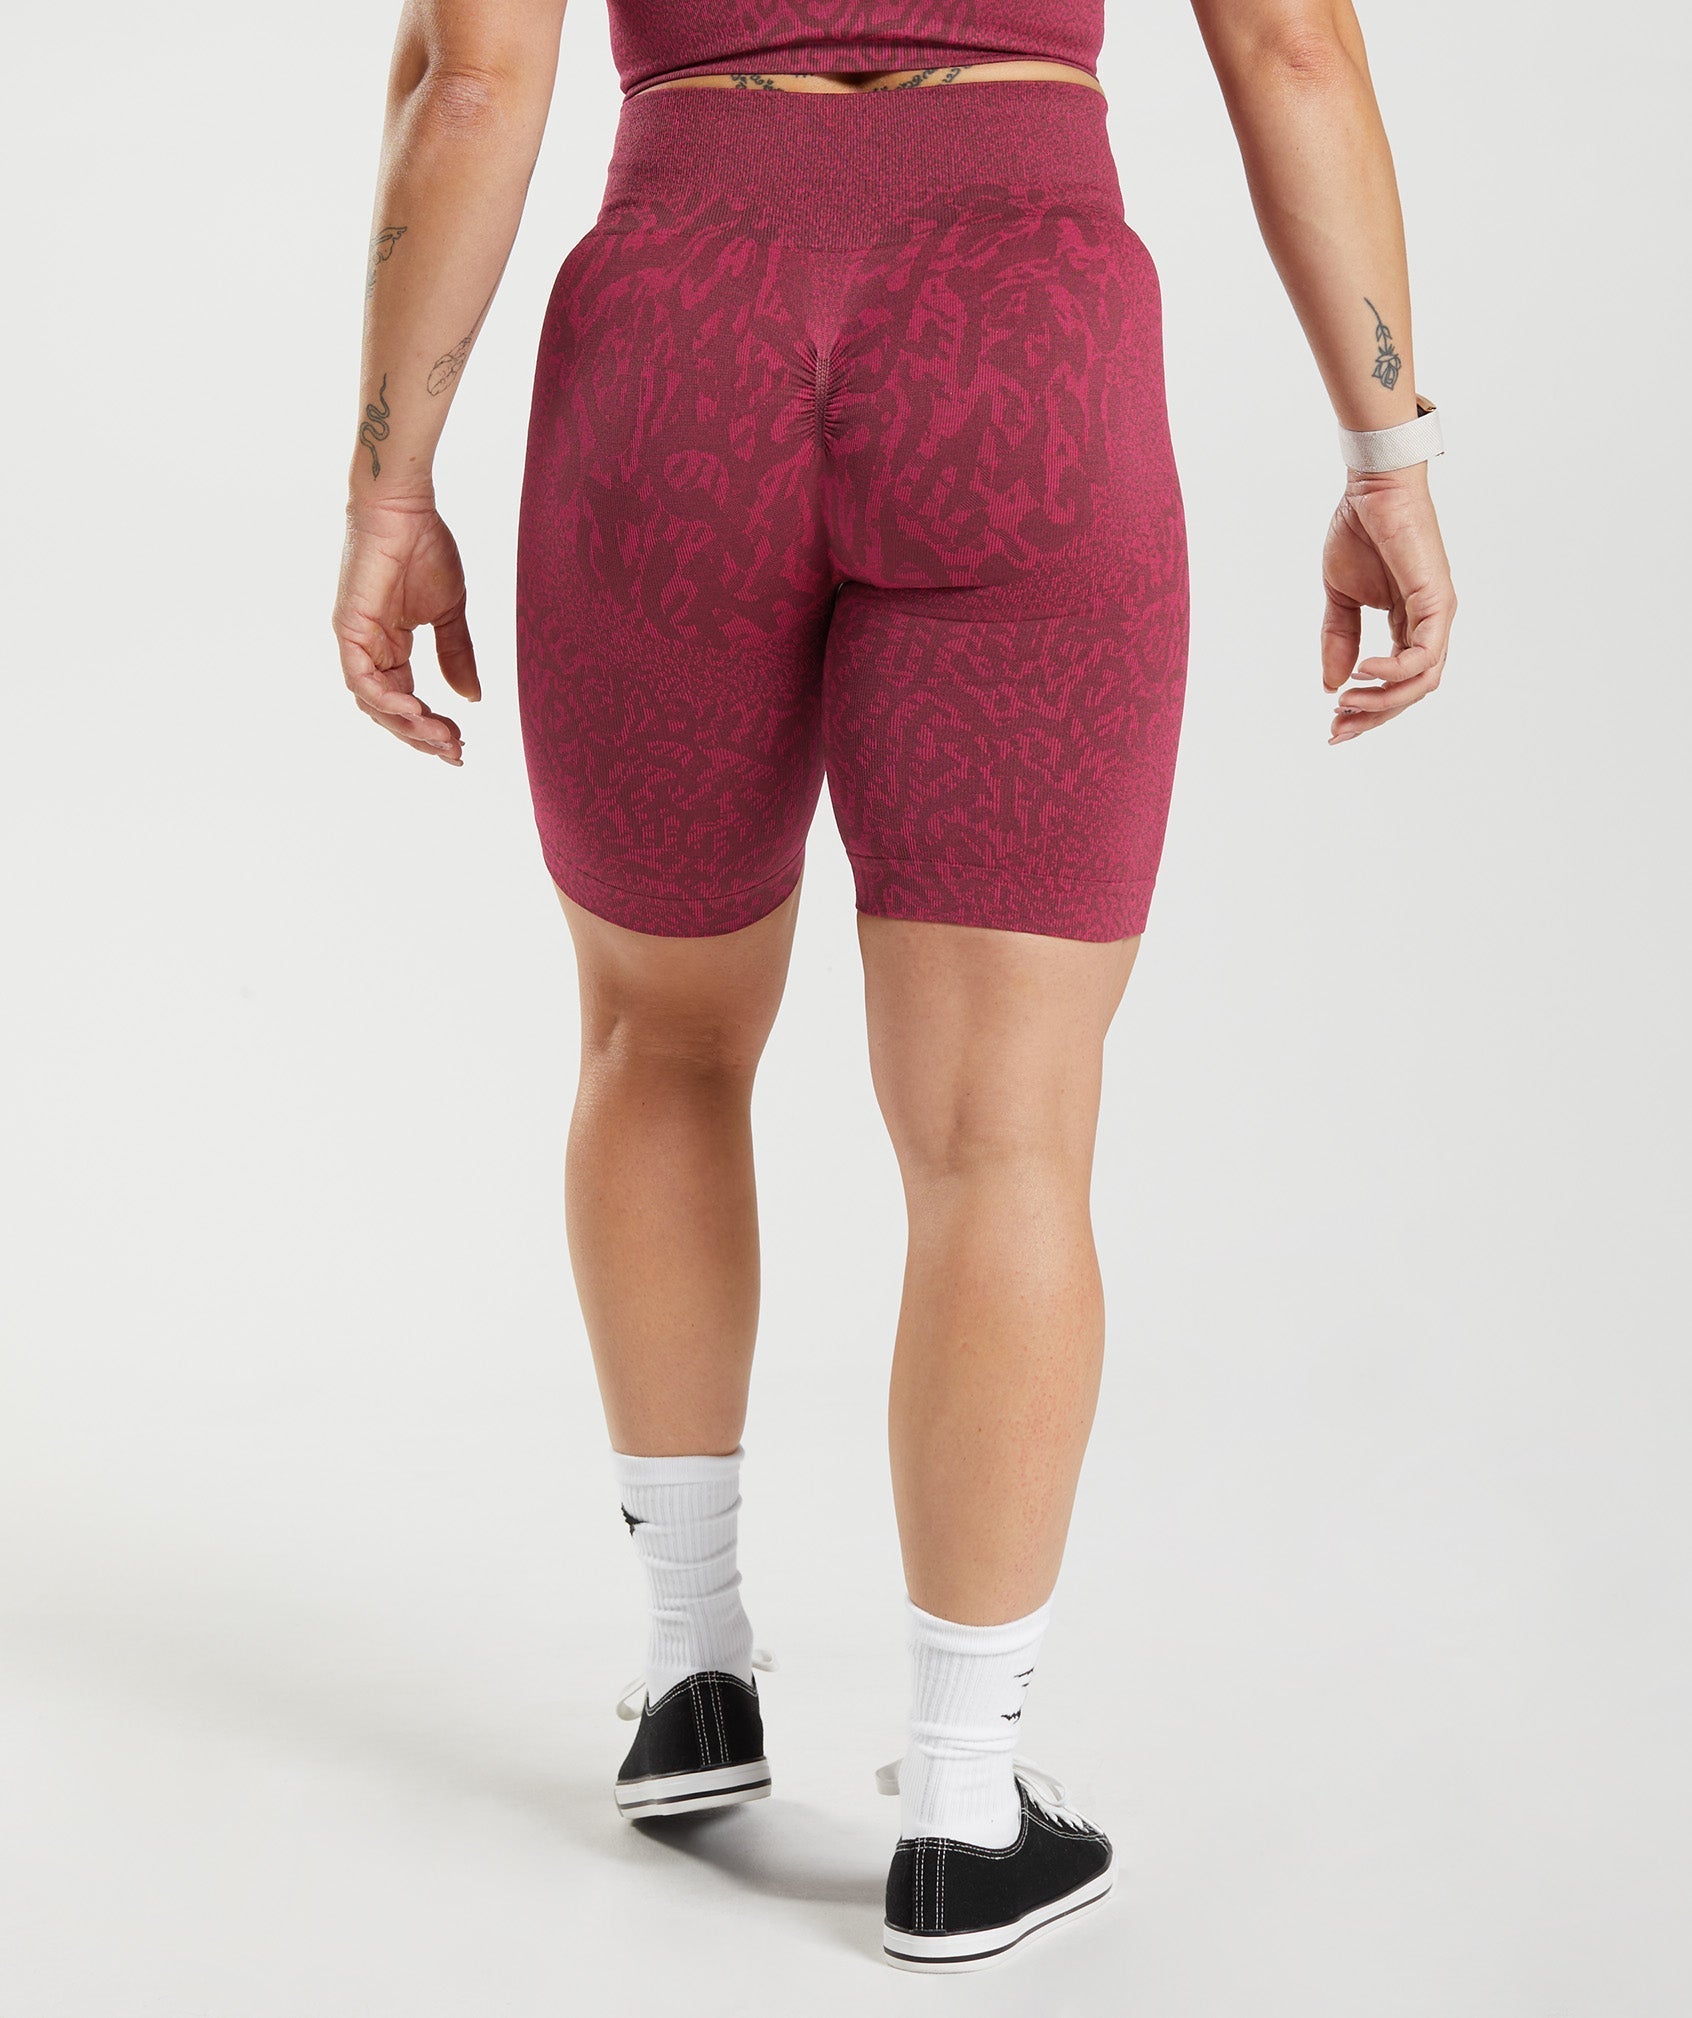 Adapt Animal Seamless Cycling Shorts in Reef | Cherry Brown